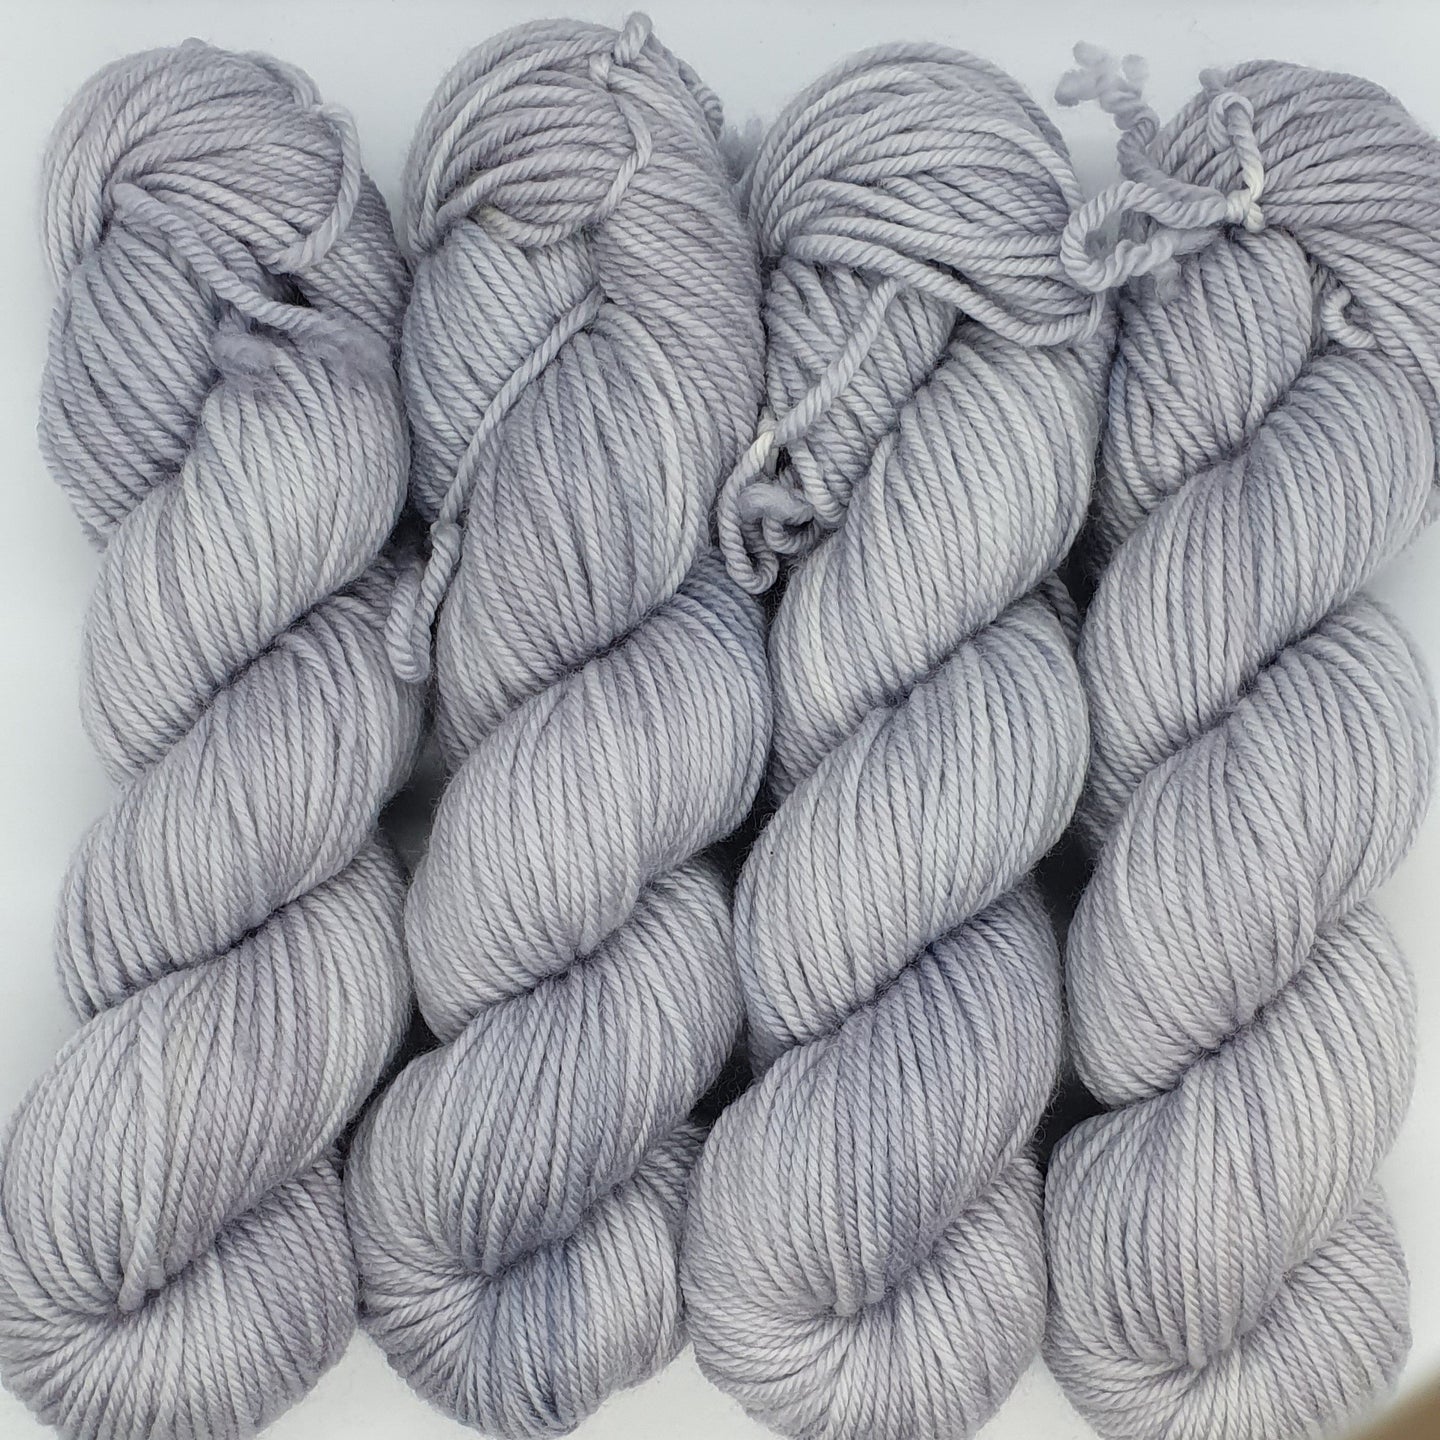 Moonlight (Wyvern Worsted 12ply)